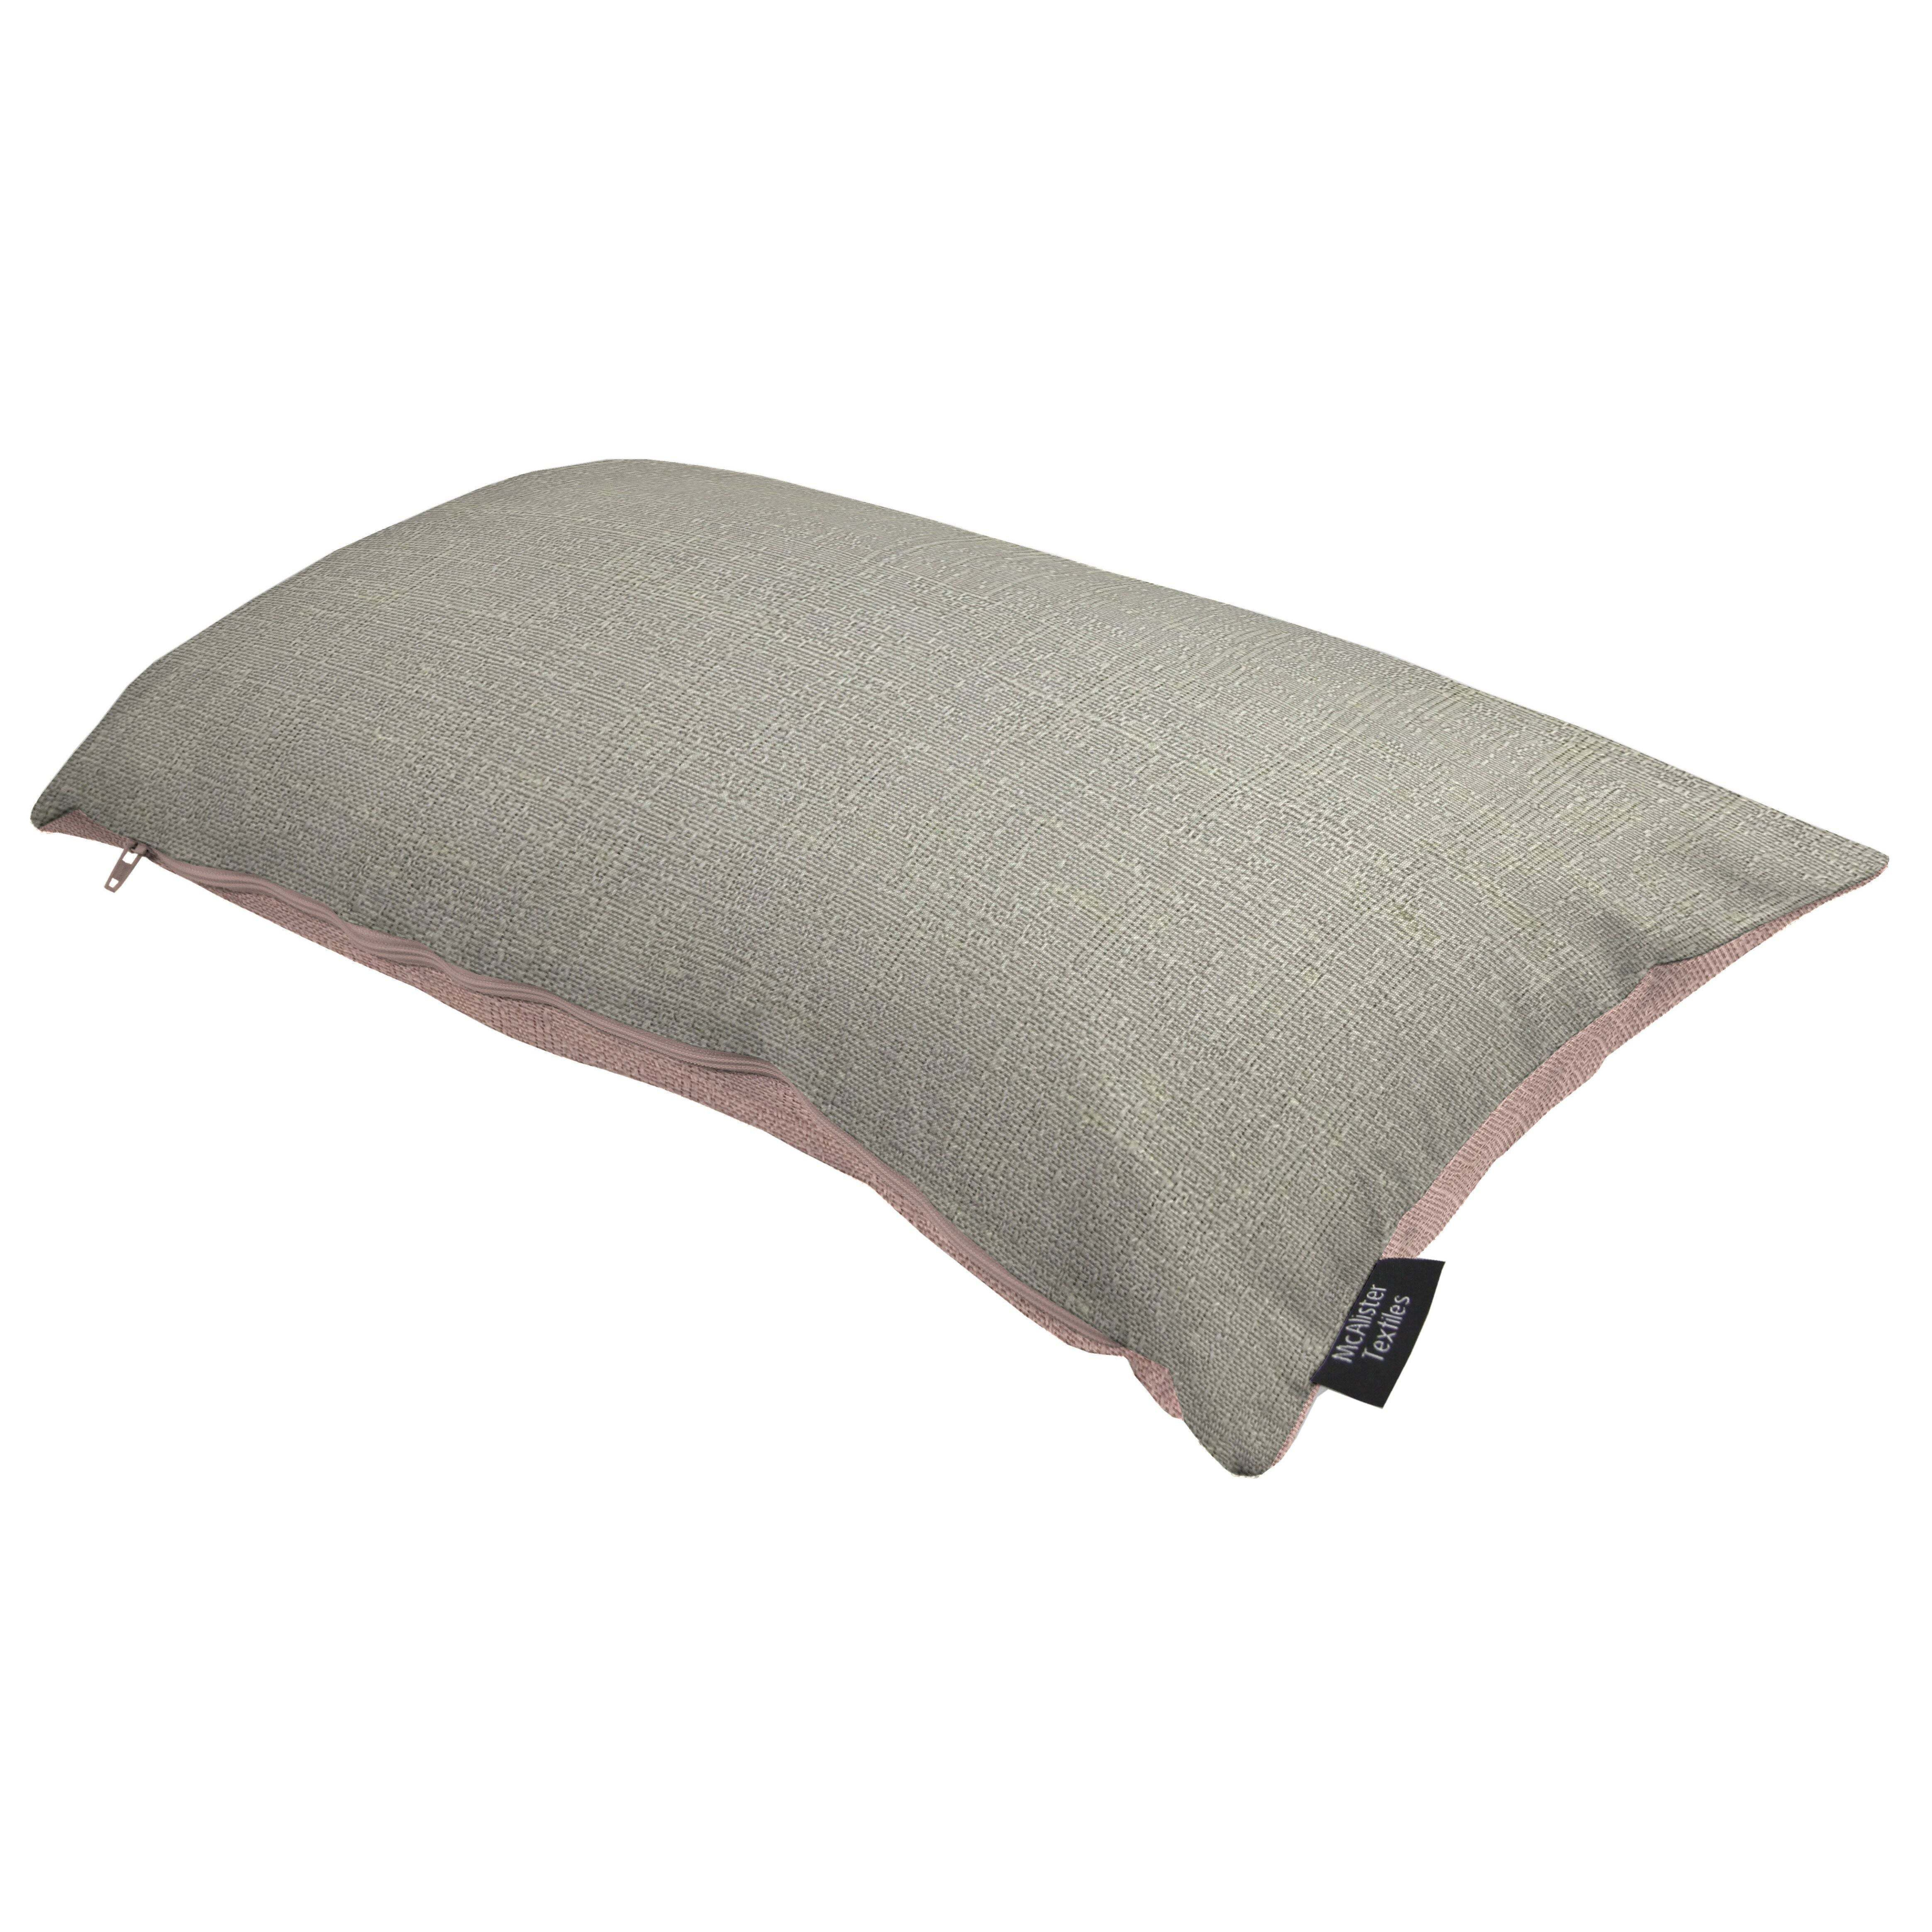 Harmony Dove Grey and Pink Plain Cushions, Cover Only / 50cm x 30cm